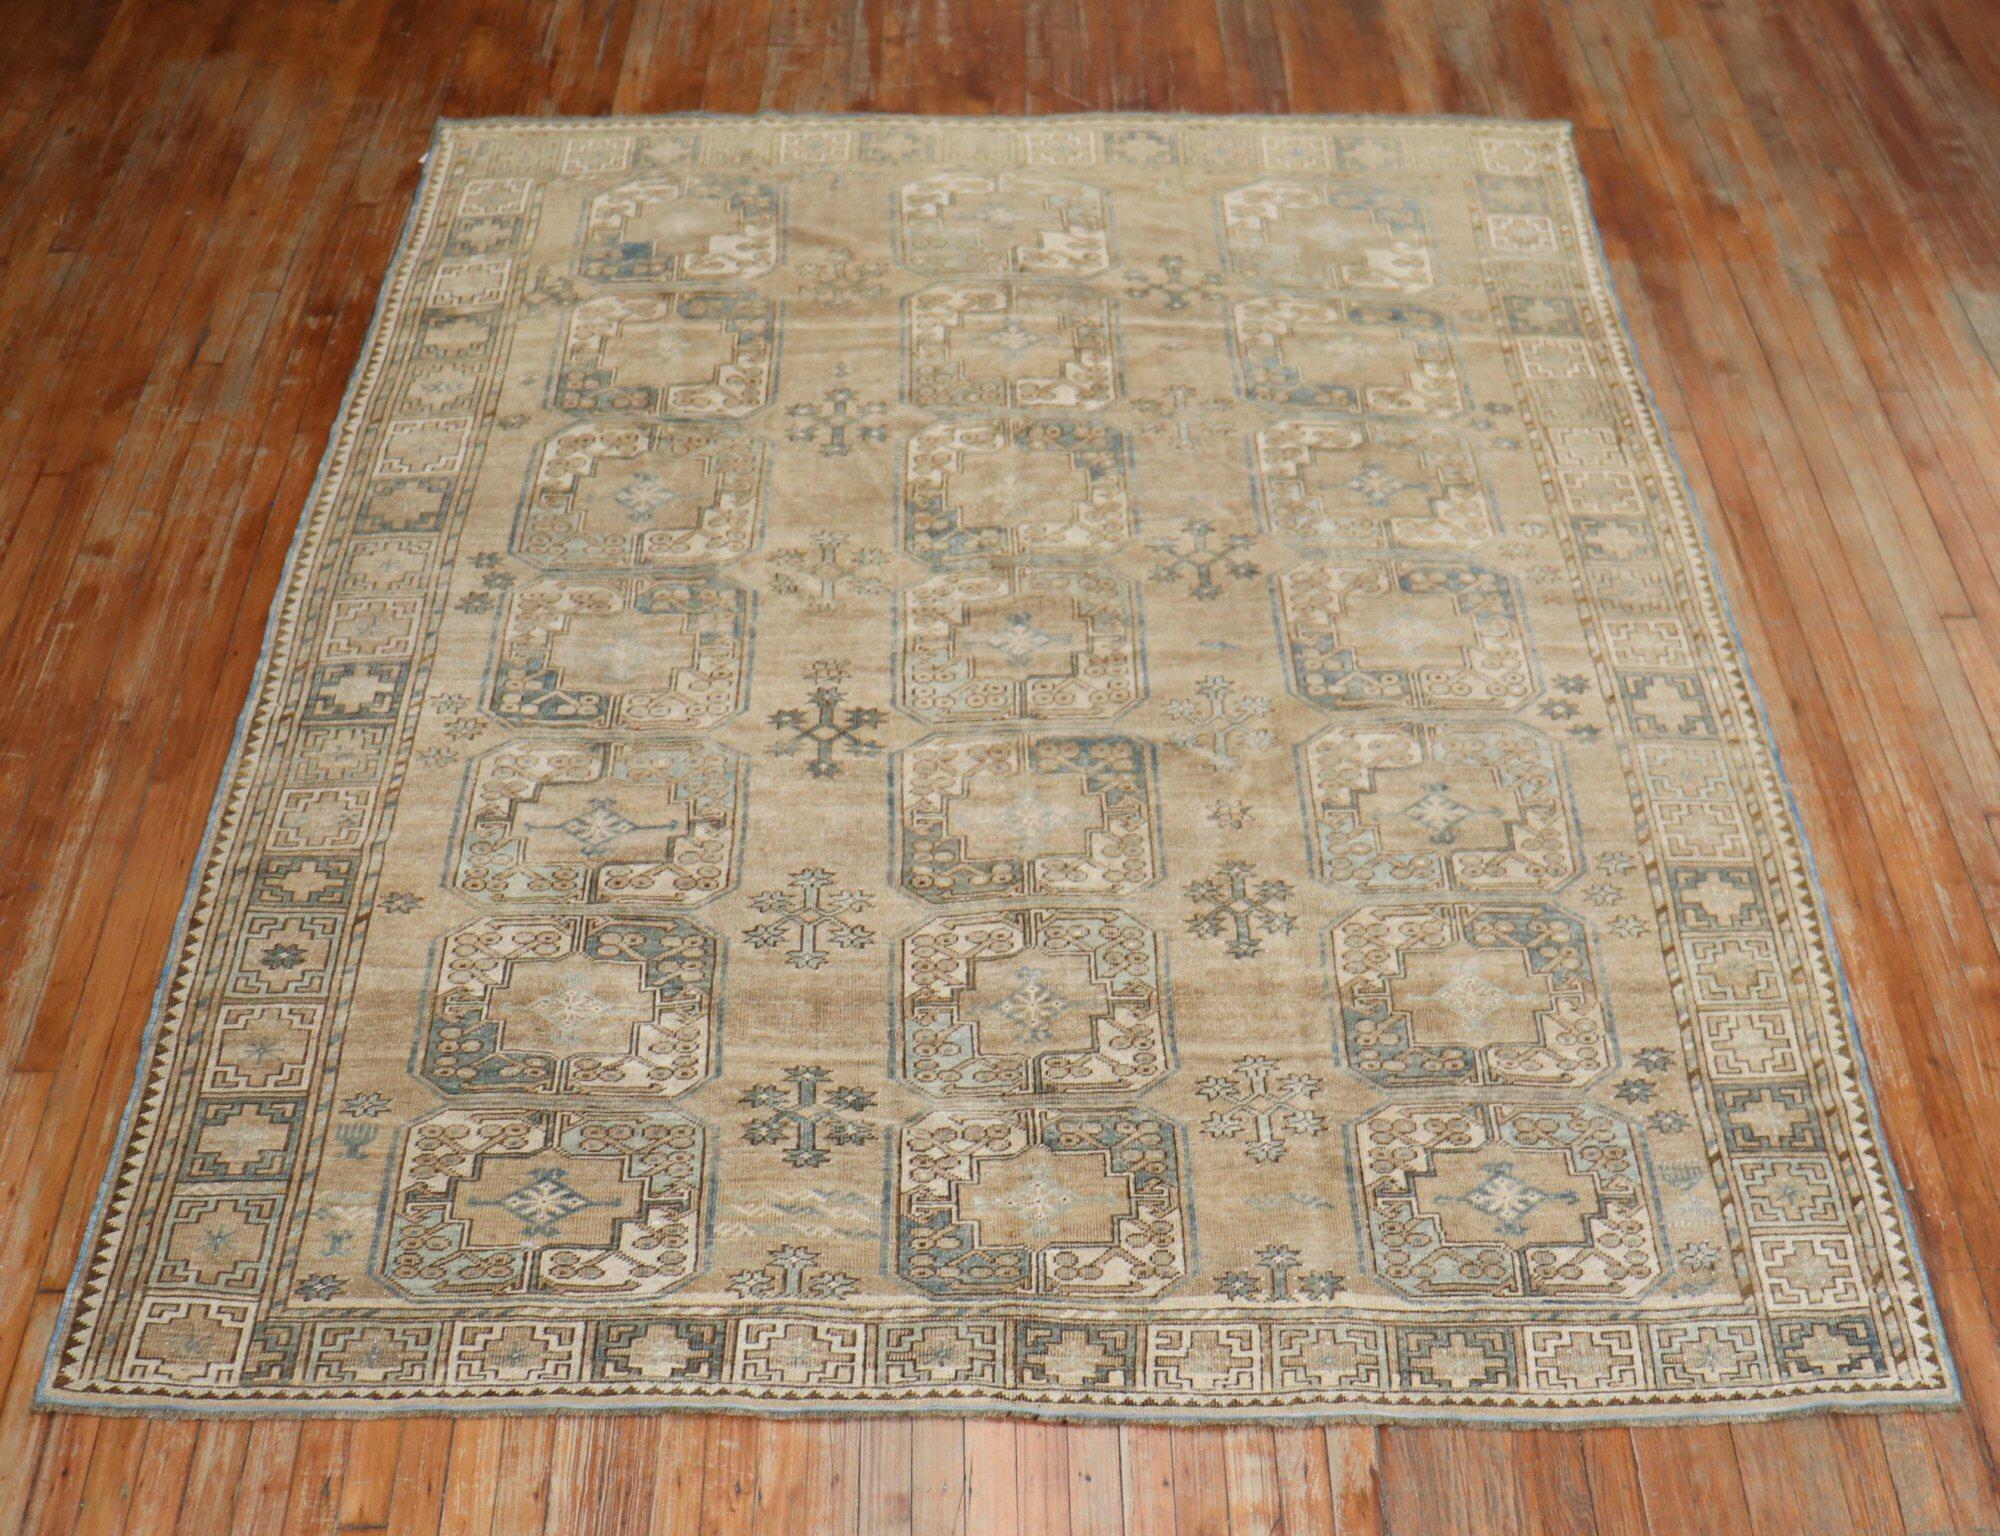 A 20th century one of a kind afghan Ersari rug with an all-over tribal motif on a soft brown field, accents in beige, denim blue, and gray

Measures: 7'4'' x 9'8''.